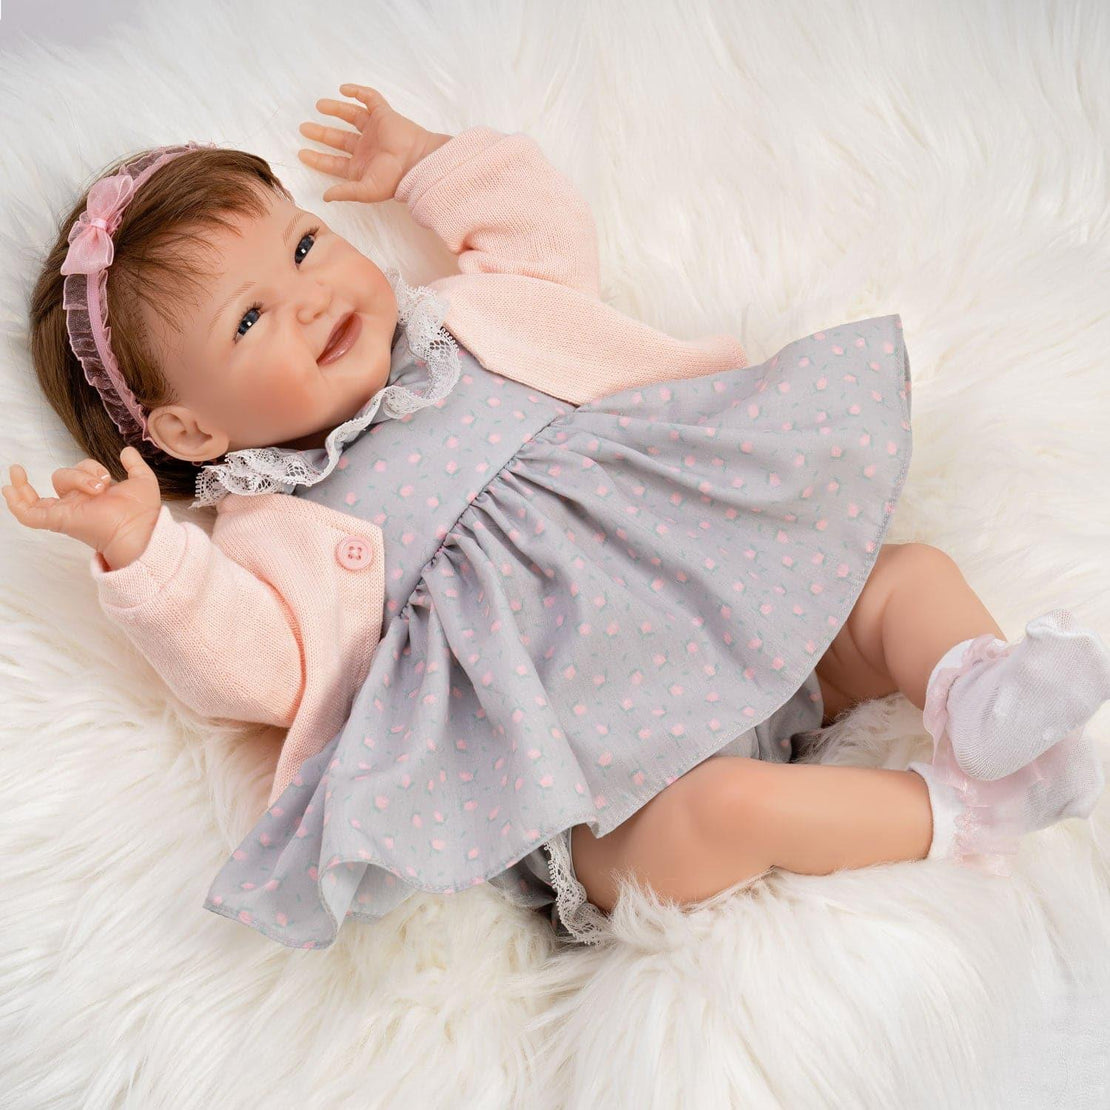 Paradise Galleries Realistic Baby Doll Reborn Toddler 19